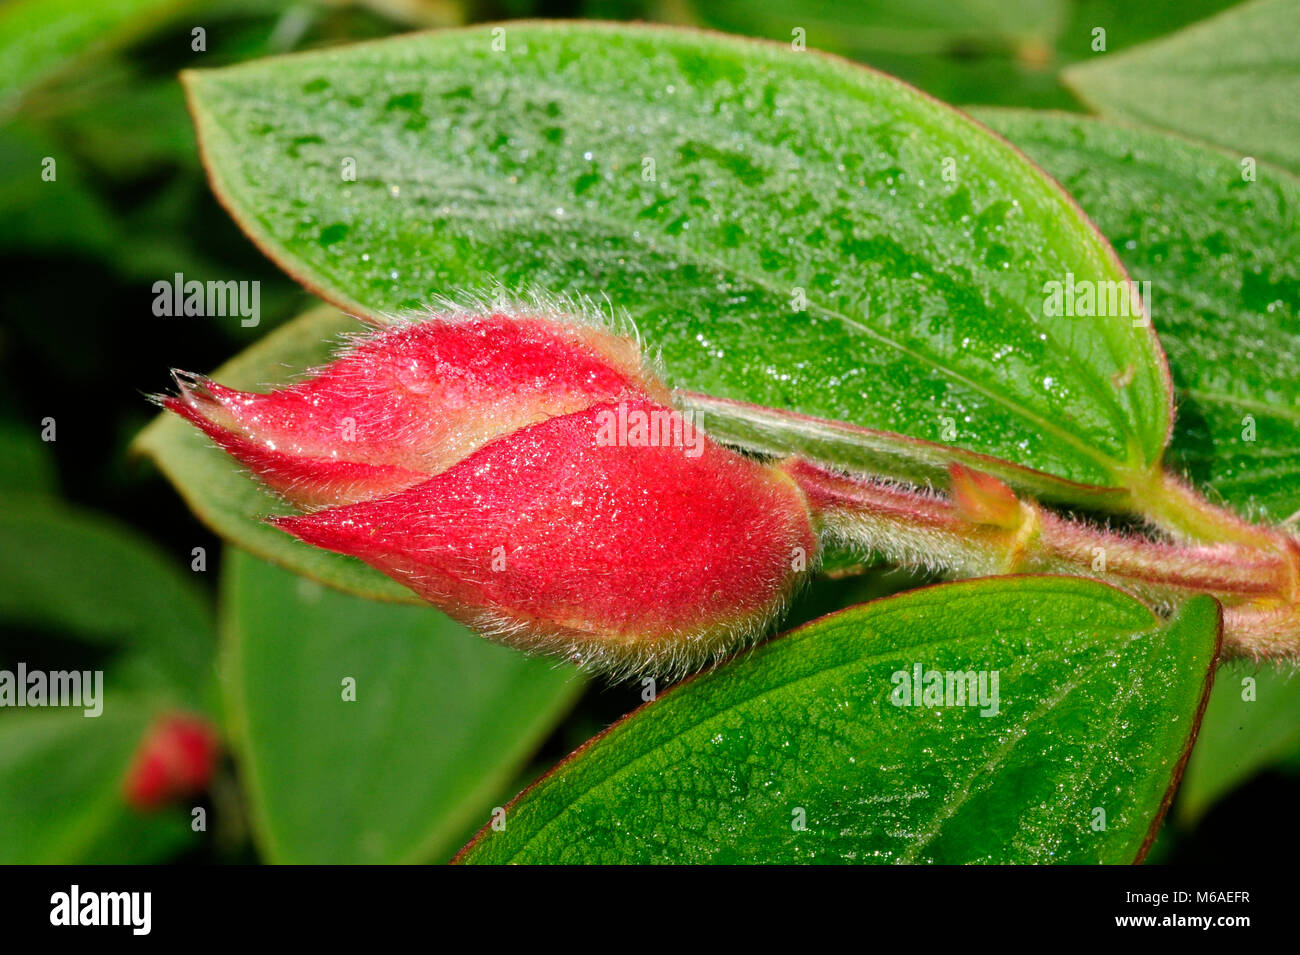 This deep red Melastoma Candidum bud is a Melastomataceae (alternatively Melastomaceae), a taxon of flowering plants found mostly in the tropics. Stock Photo